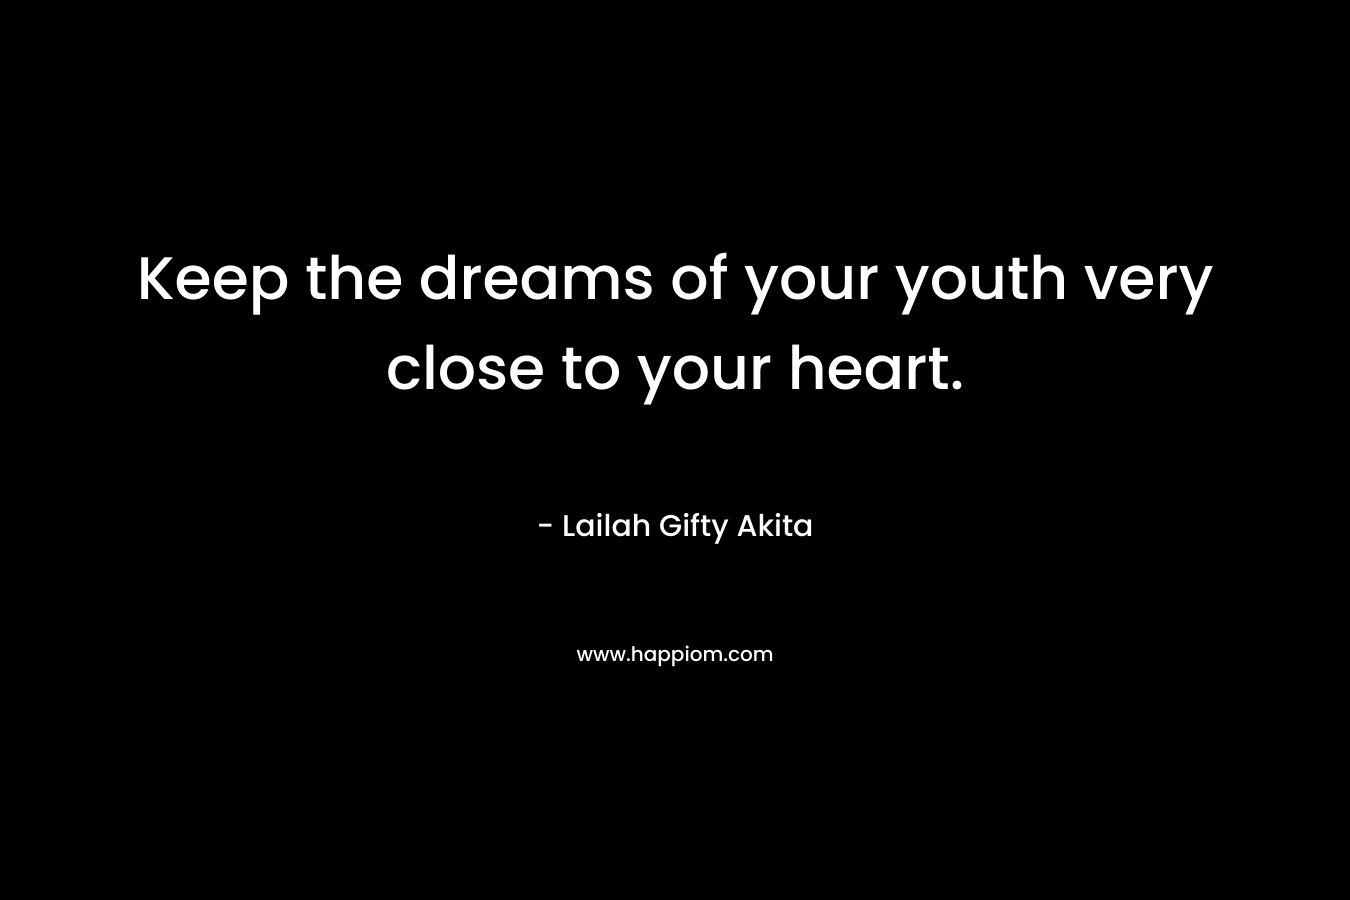 Keep the dreams of your youth very close to your heart. – Lailah Gifty Akita